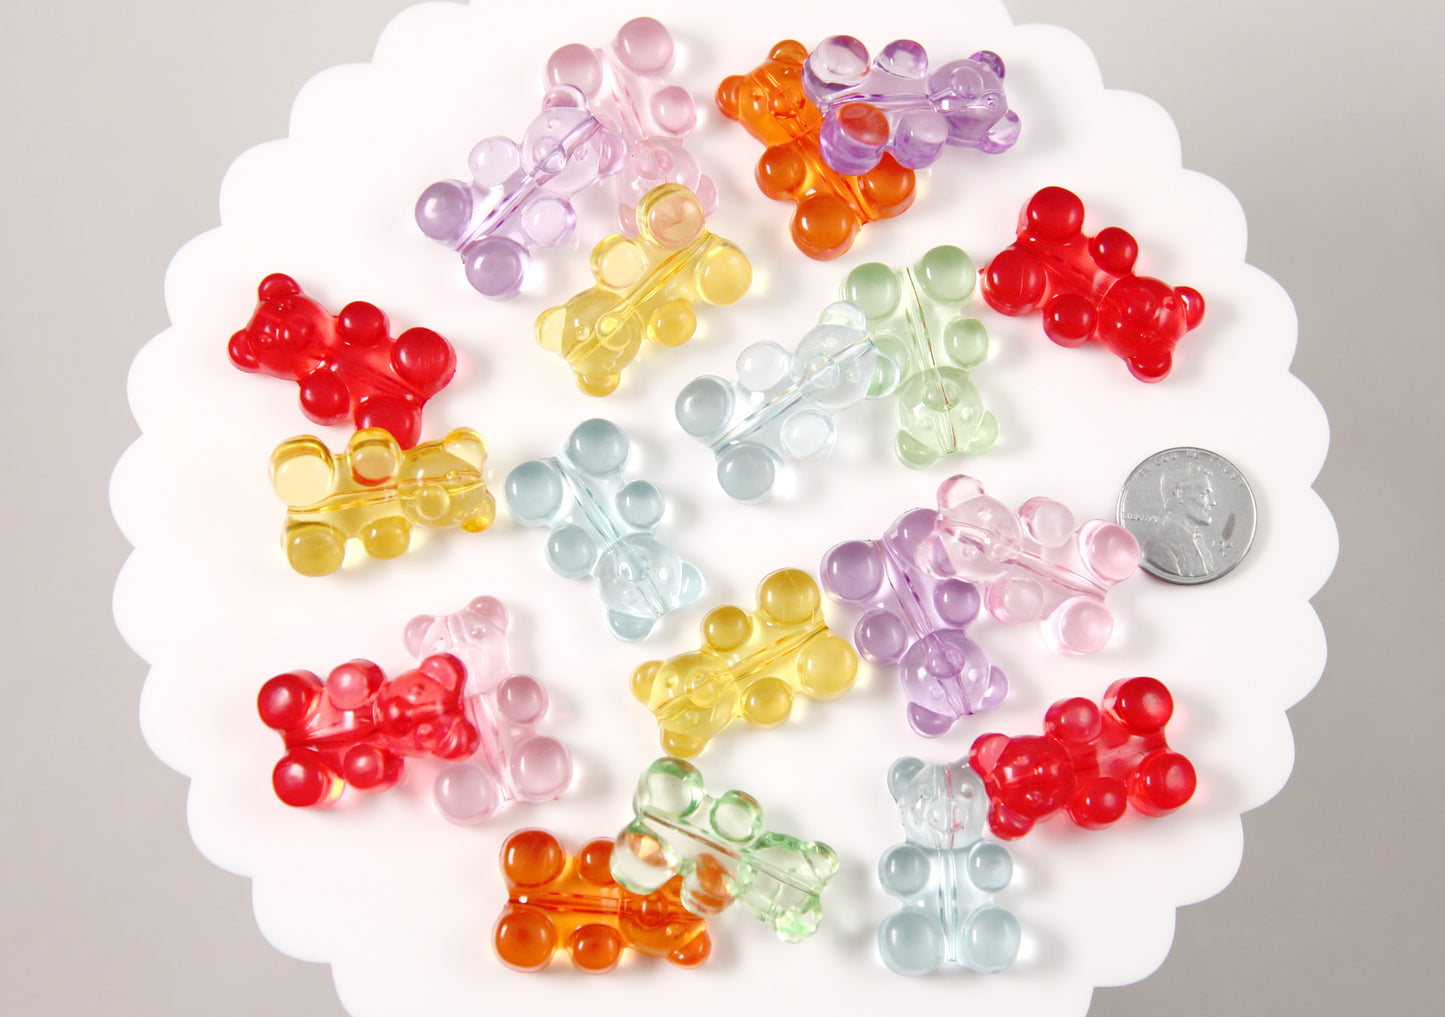 Big Gummy Bear Beads - 30mm Fake Gummy Bears with Hole for Stringing - Fake Candy Resin Beads - 21 pc set